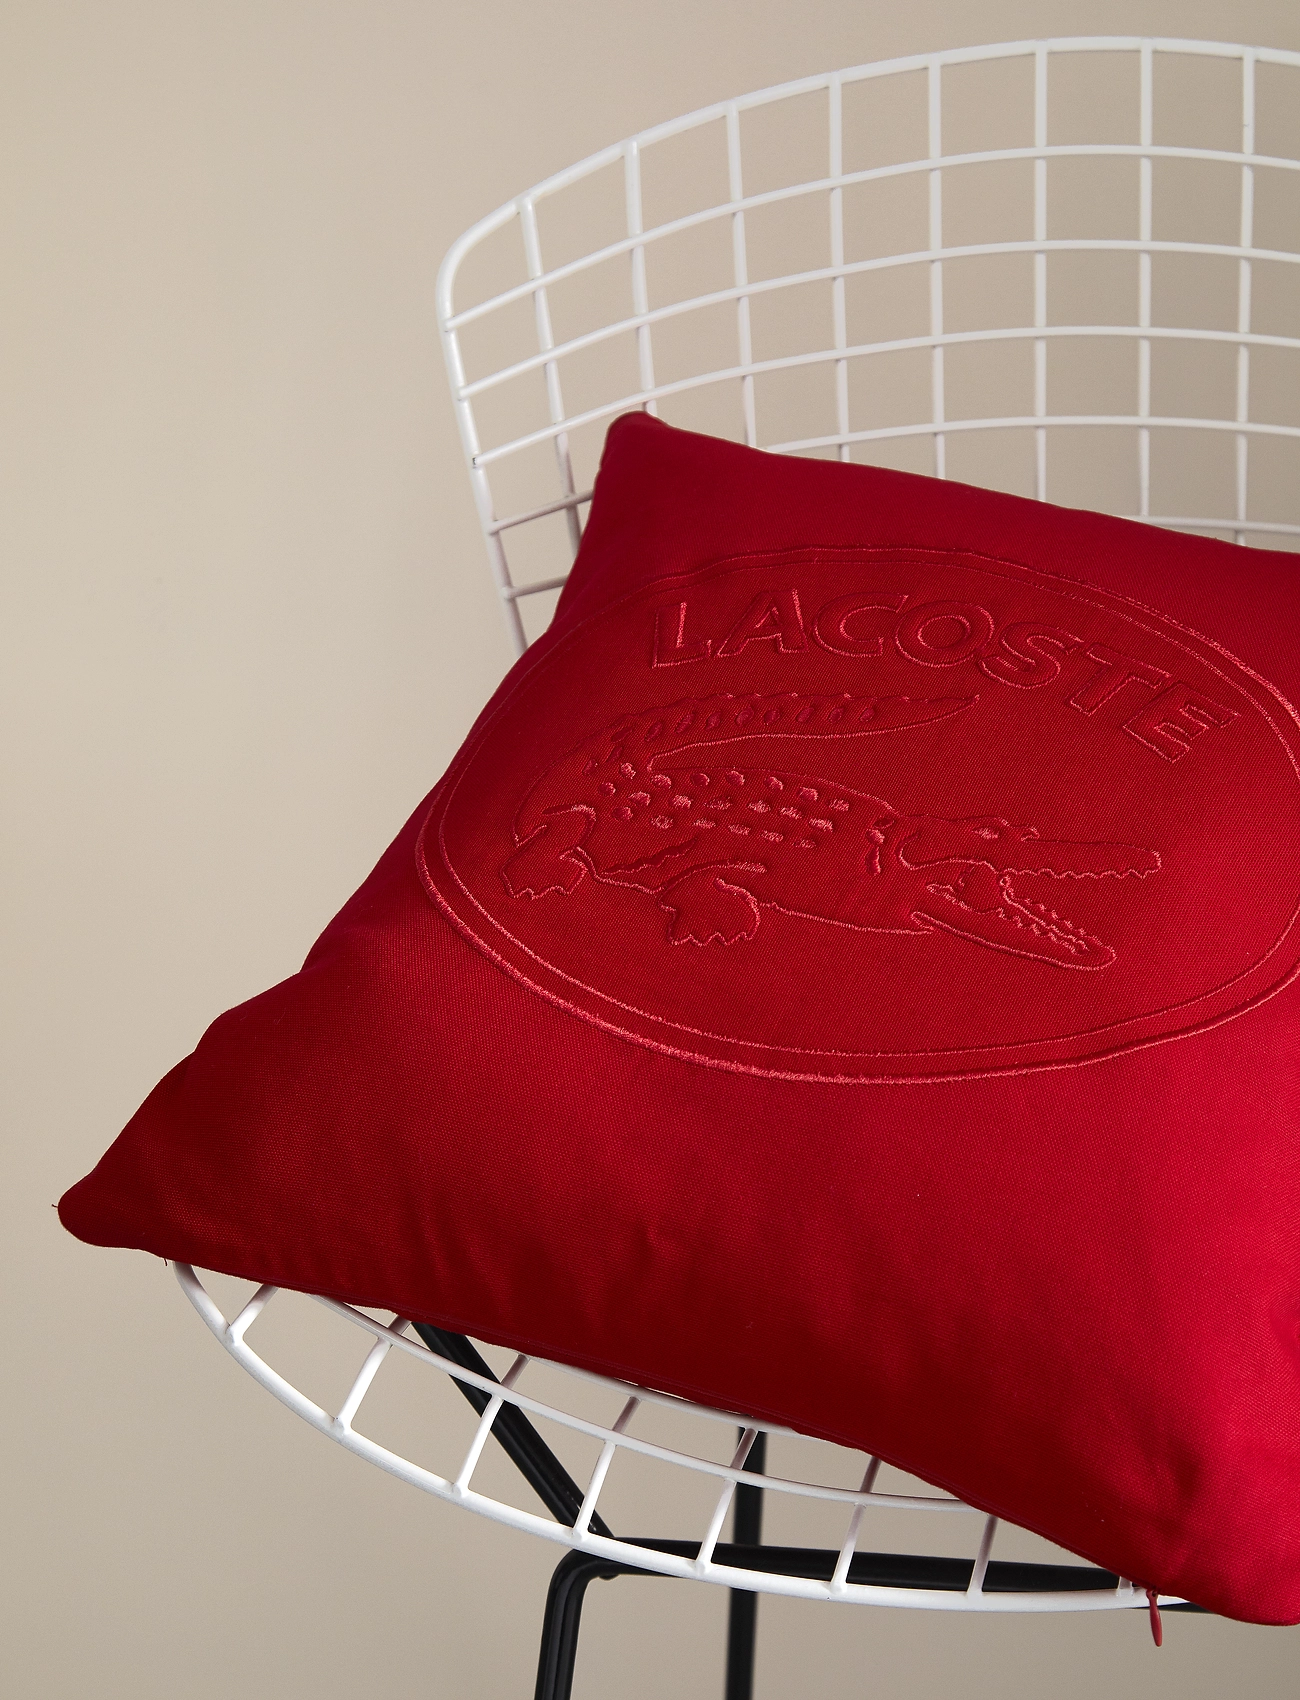 Lacoste Home - LLACOSTE Cushion cover - pudebetræk - rouge - 1